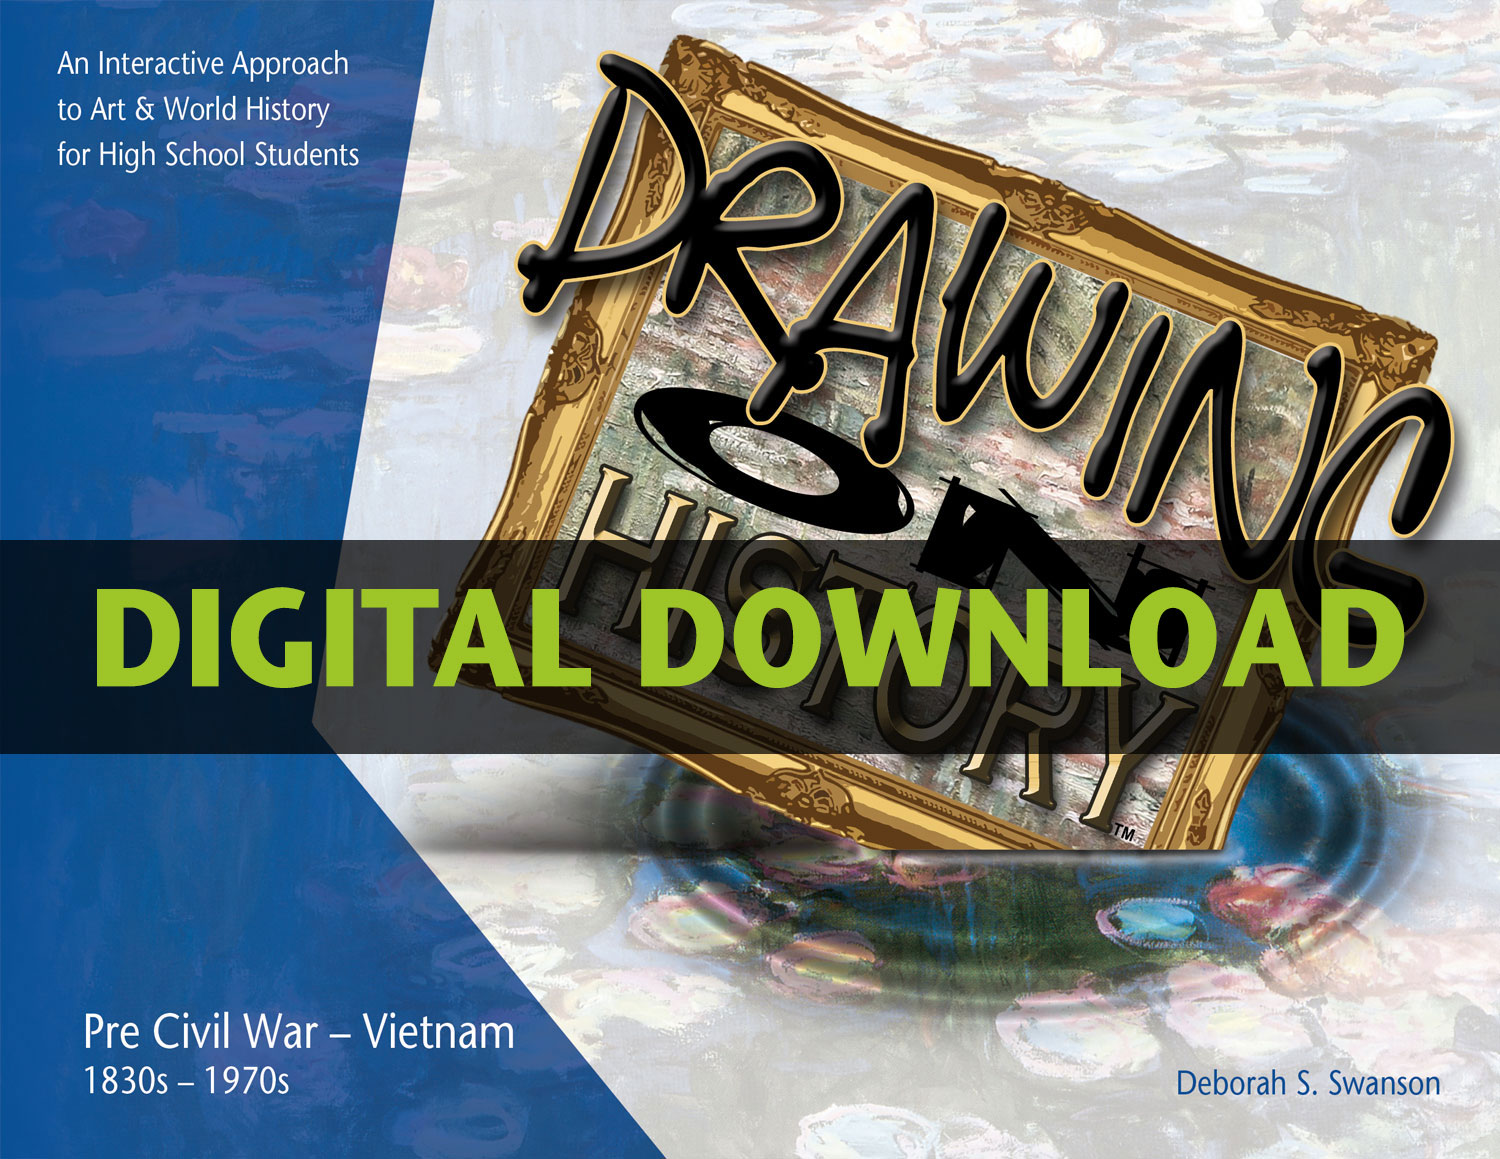 Drawing on History - Digital Download PDF - Art Curriculum for Homeschool High School Students - Download Art Projects Now - KnoodelU Publishing